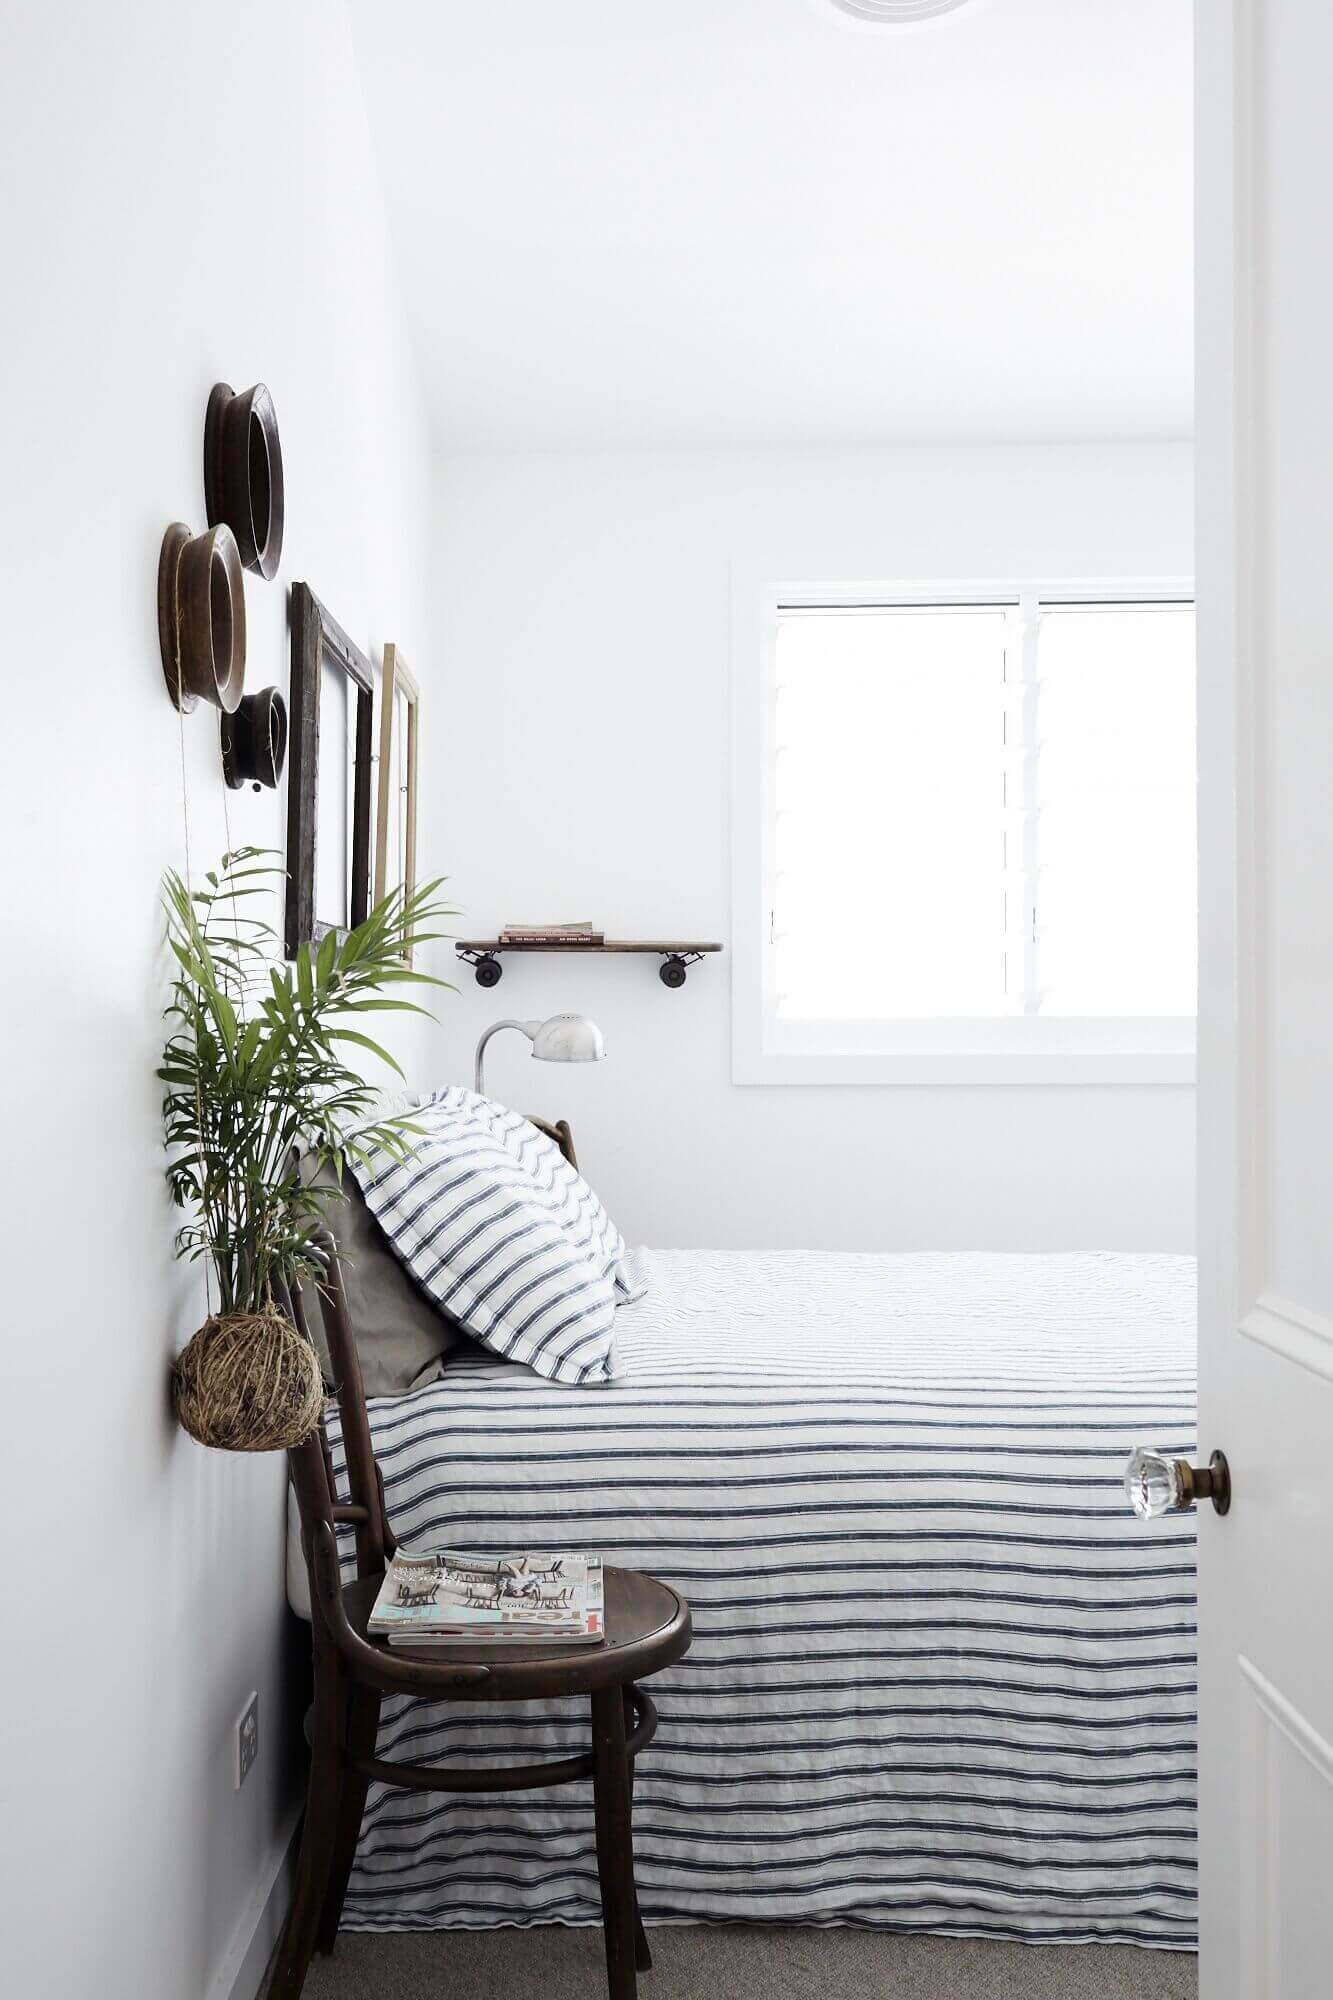 Stylish bedroom at Magnolia House, Byron Beach Abodes with classic striped bed linen and curated vintage wall art